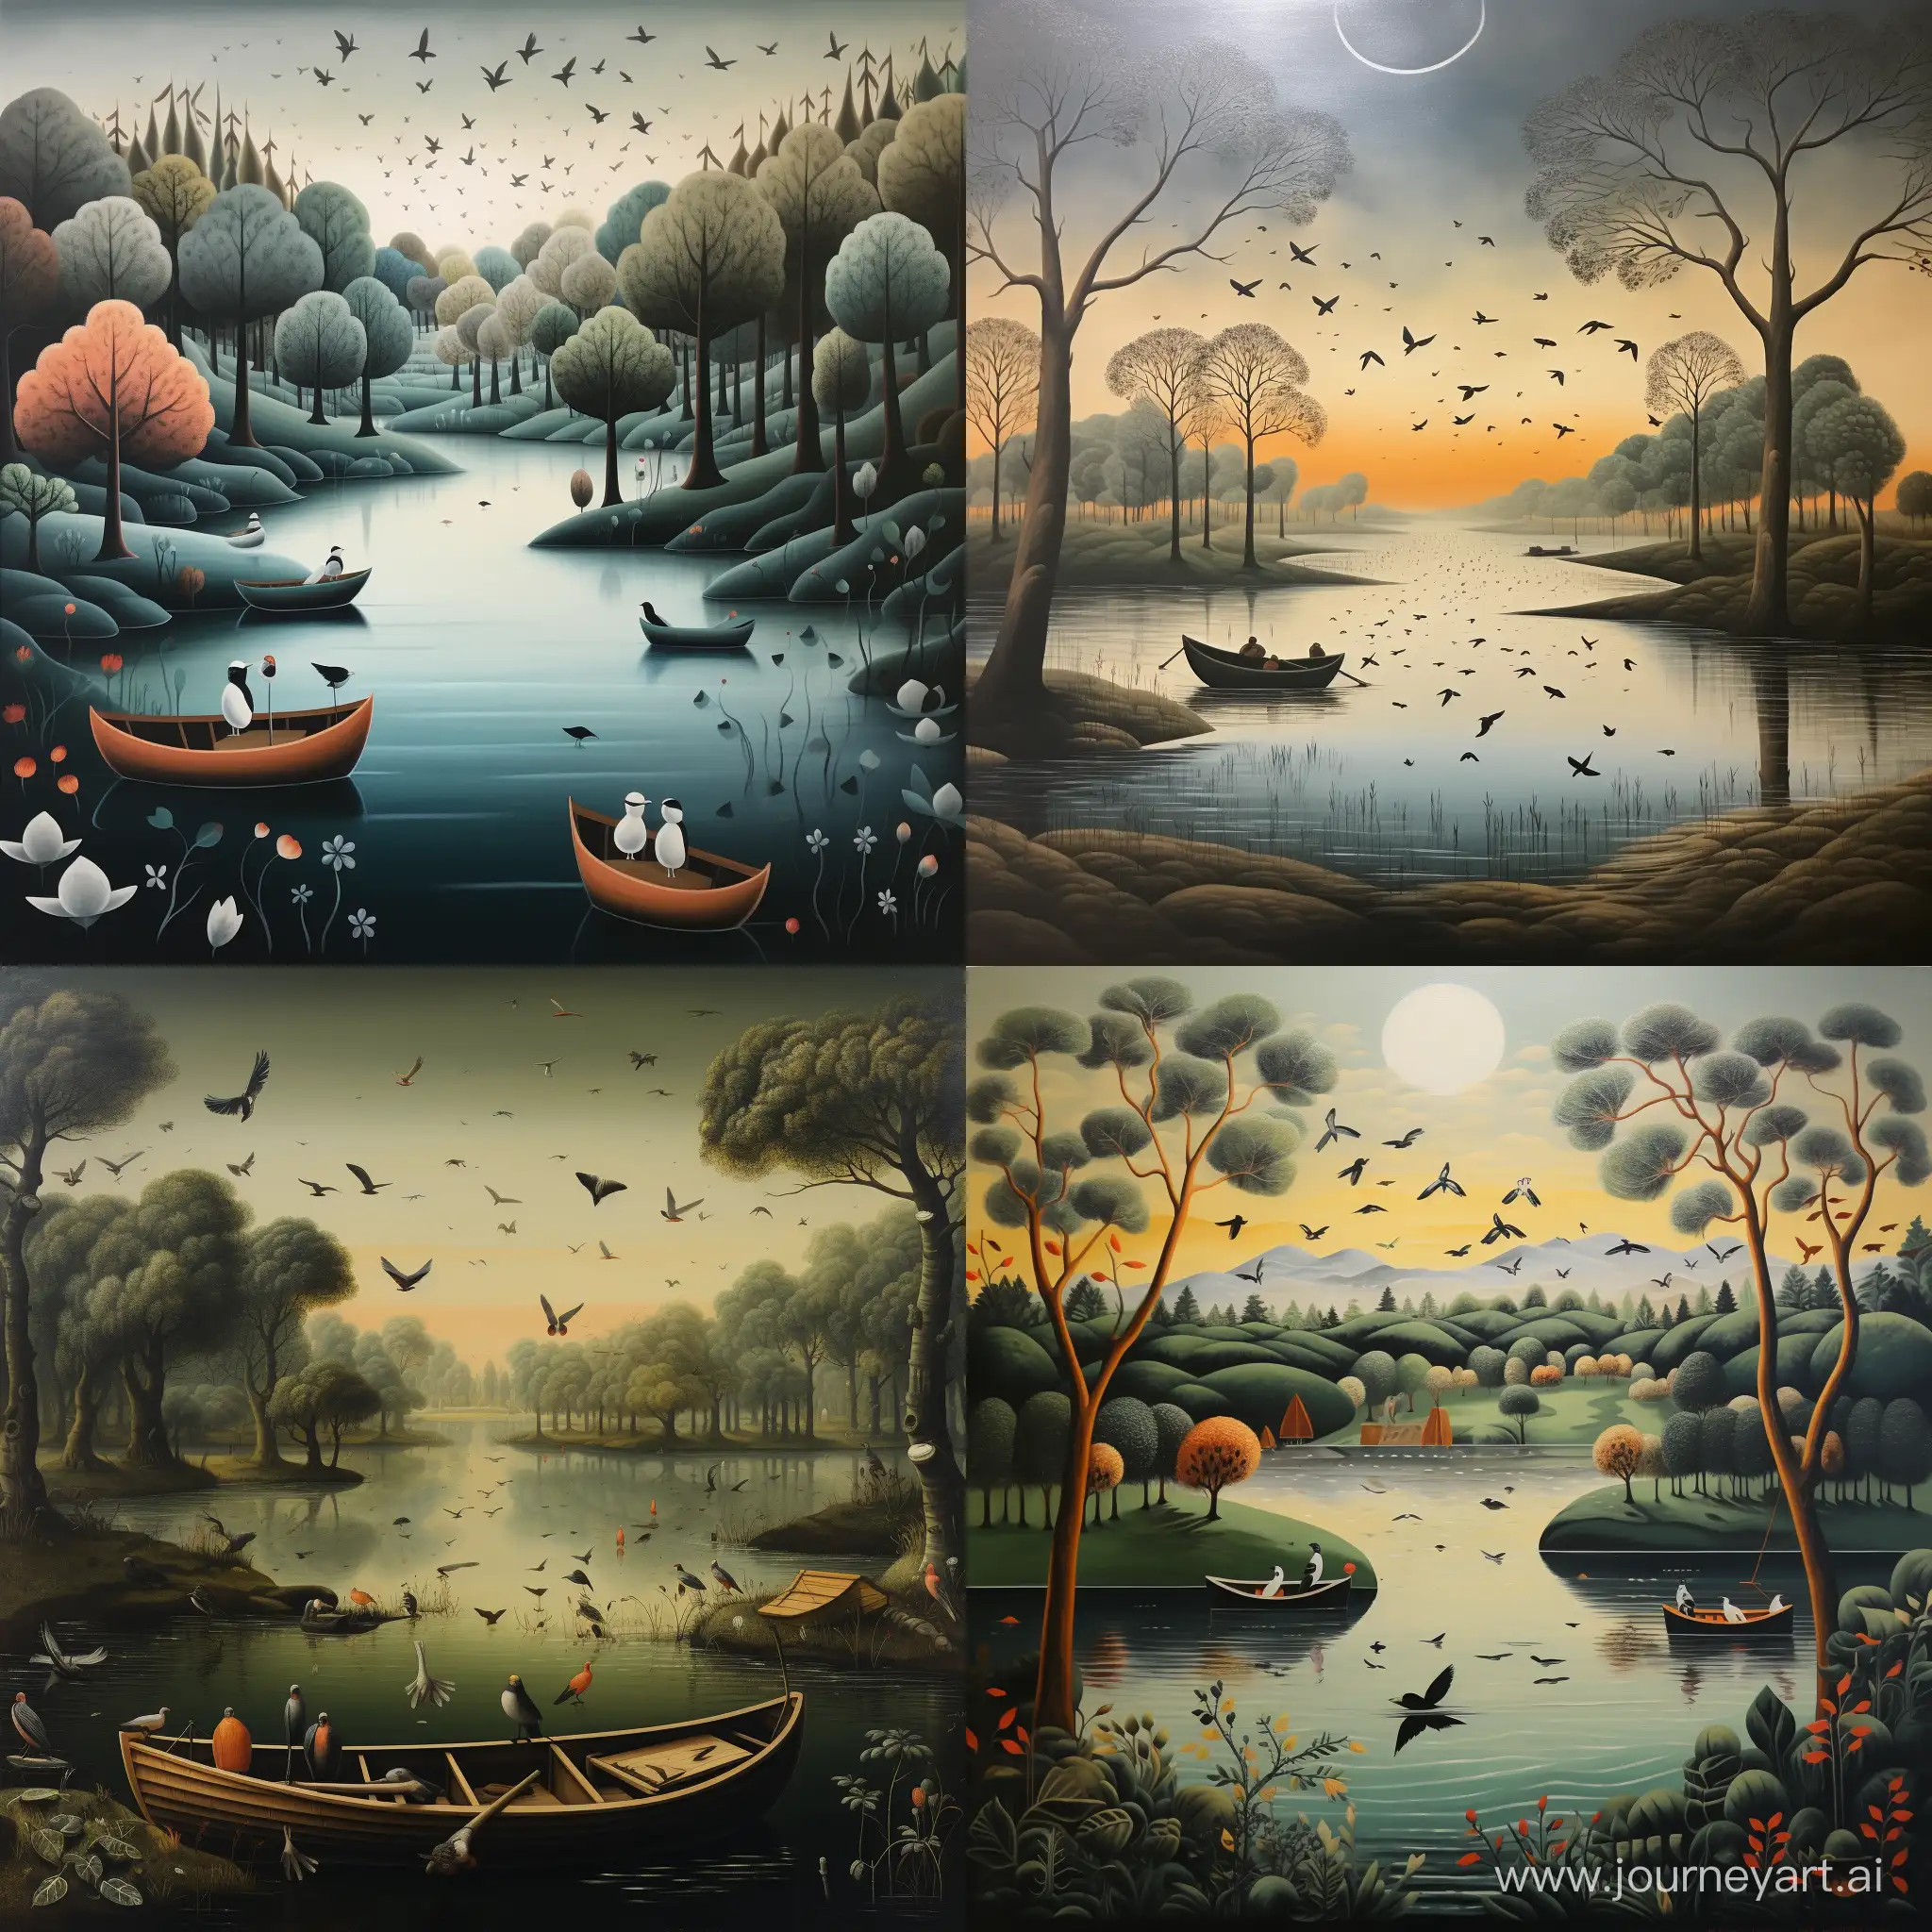 Water lake with boats and birds